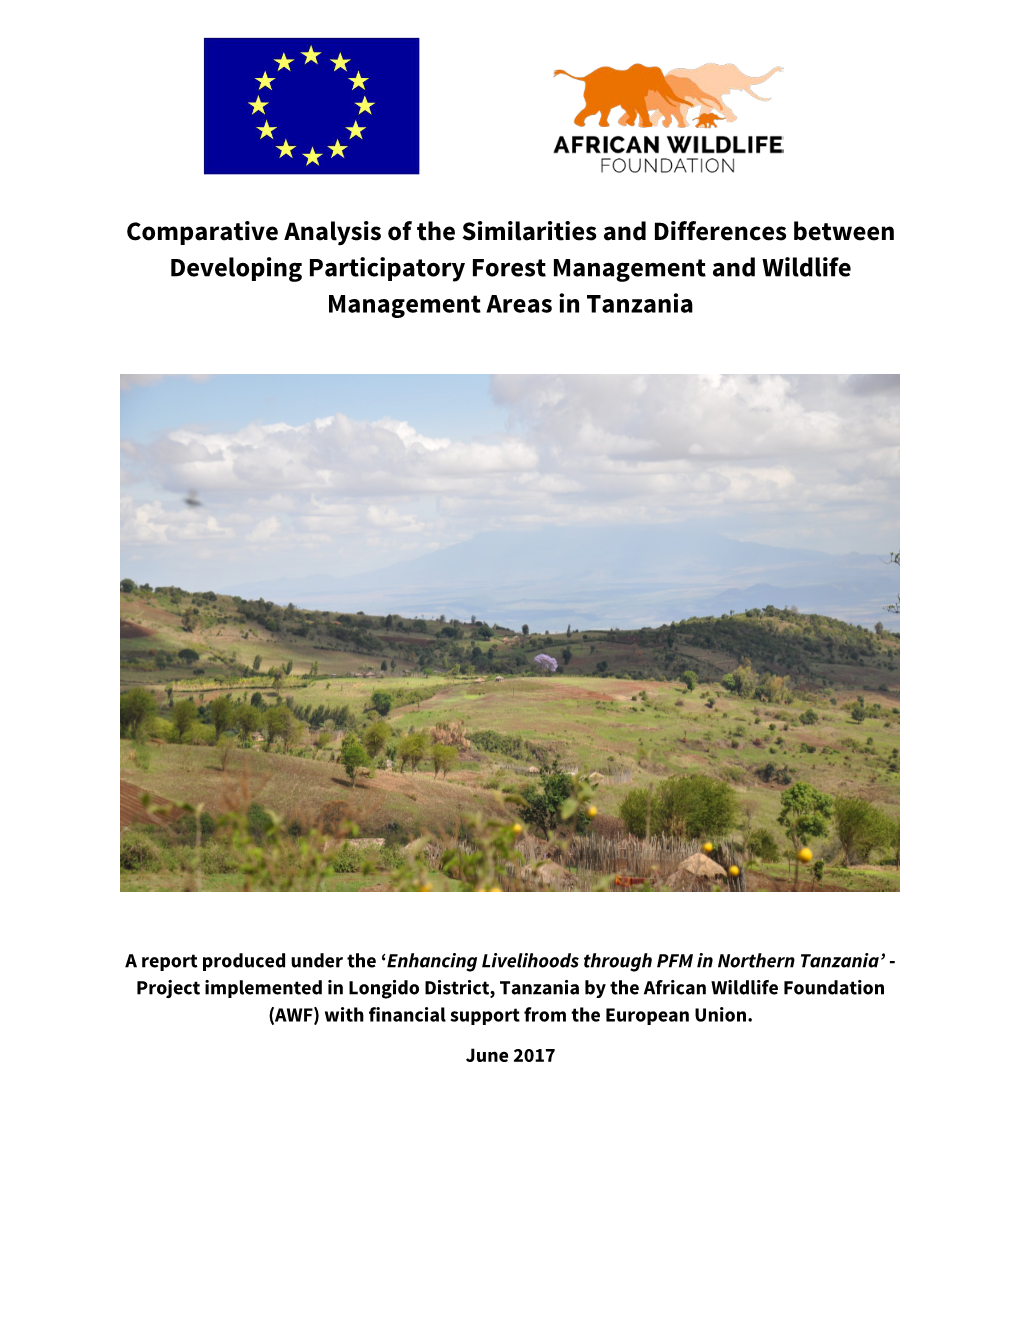 Comparative Analysis of the Similarities and Differences Between Developing Participatory Forest Management and Wildlife Management Areas in Tanzania